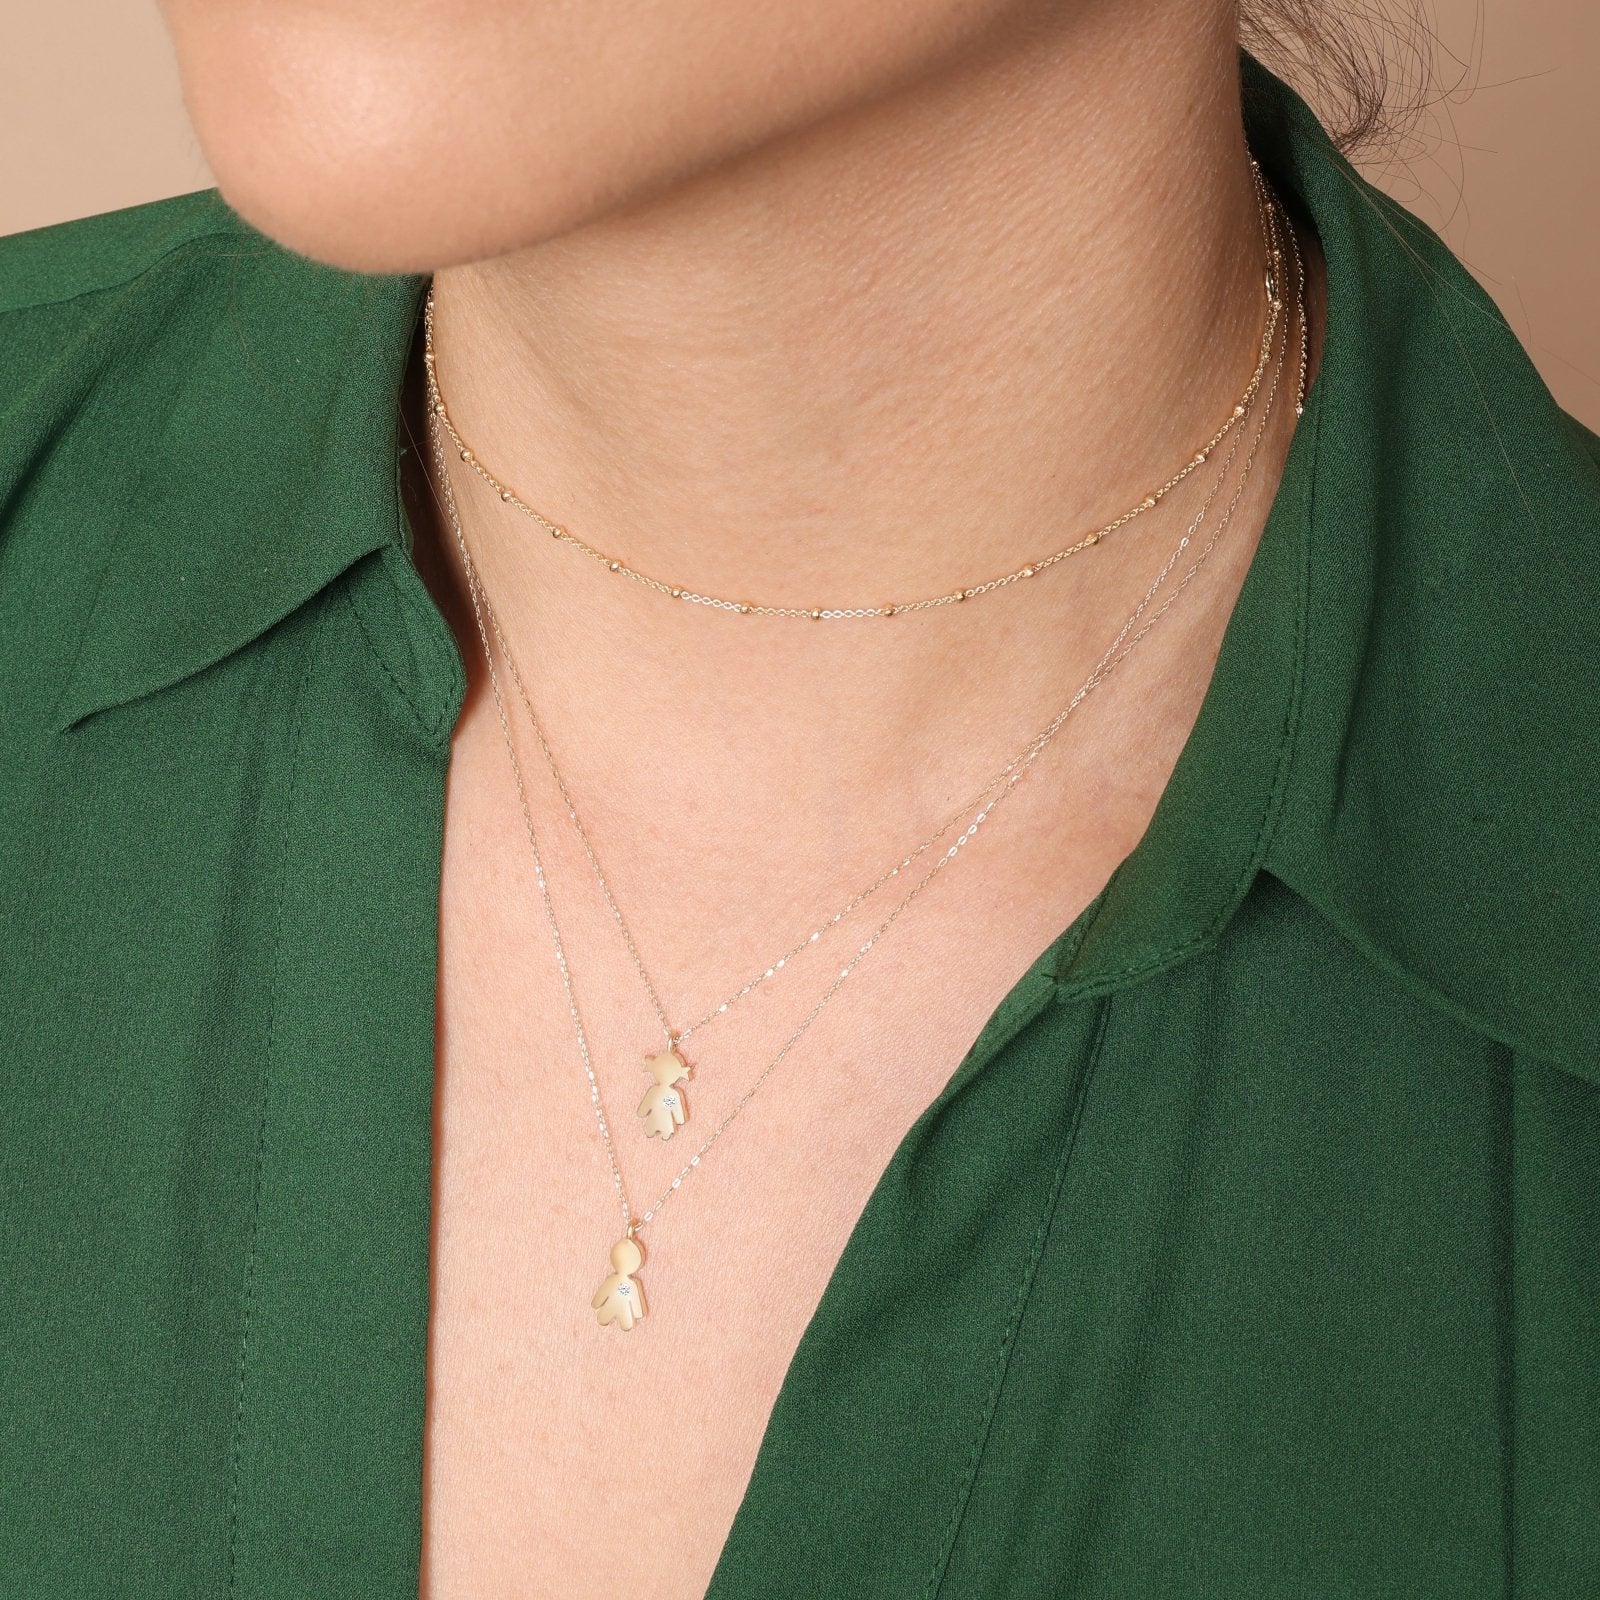 Classic Beaded Chain Necklace Necklaces Estella Collection #product_description# 14k Layering Necklace Ready to Ship #tag4# #tag5# #tag6# #tag7# #tag8# #tag9# #tag10#